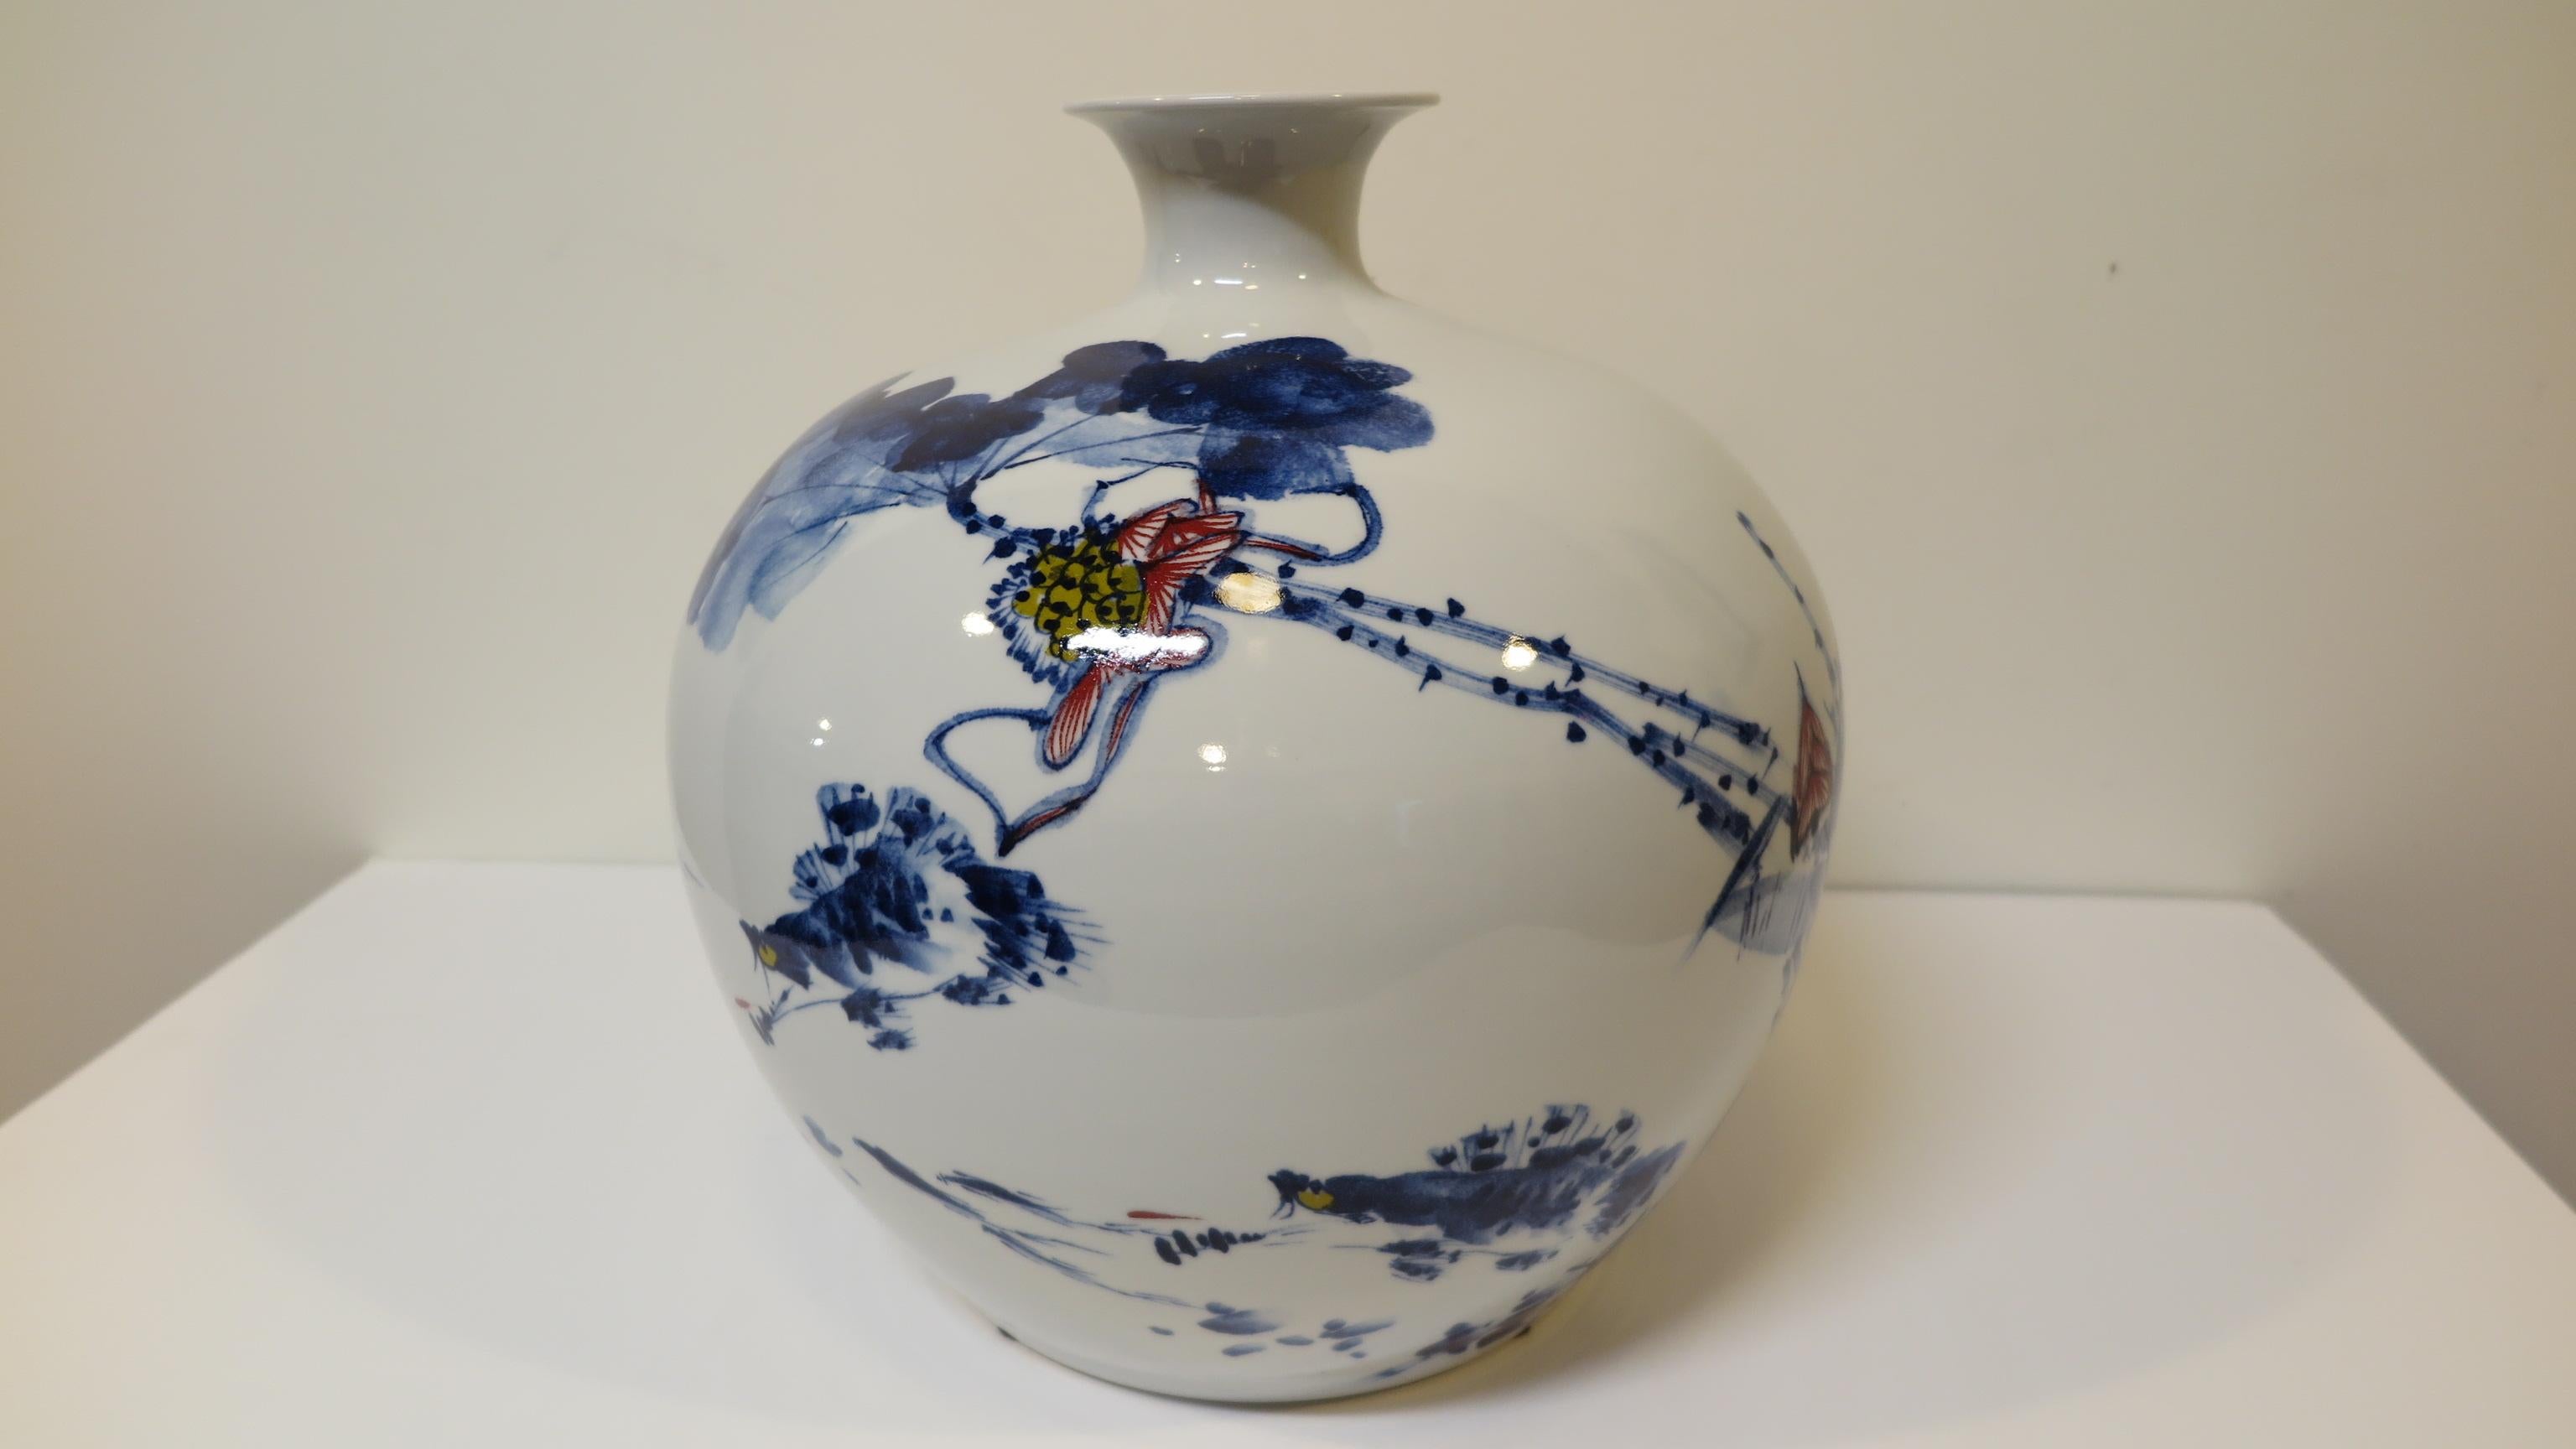 Artisan porcelain Vase Vessel hand formed of quality high fired fine porcelain. Wonderful shape with Indigo painting completely hand crafted. Artist-signed with poem.